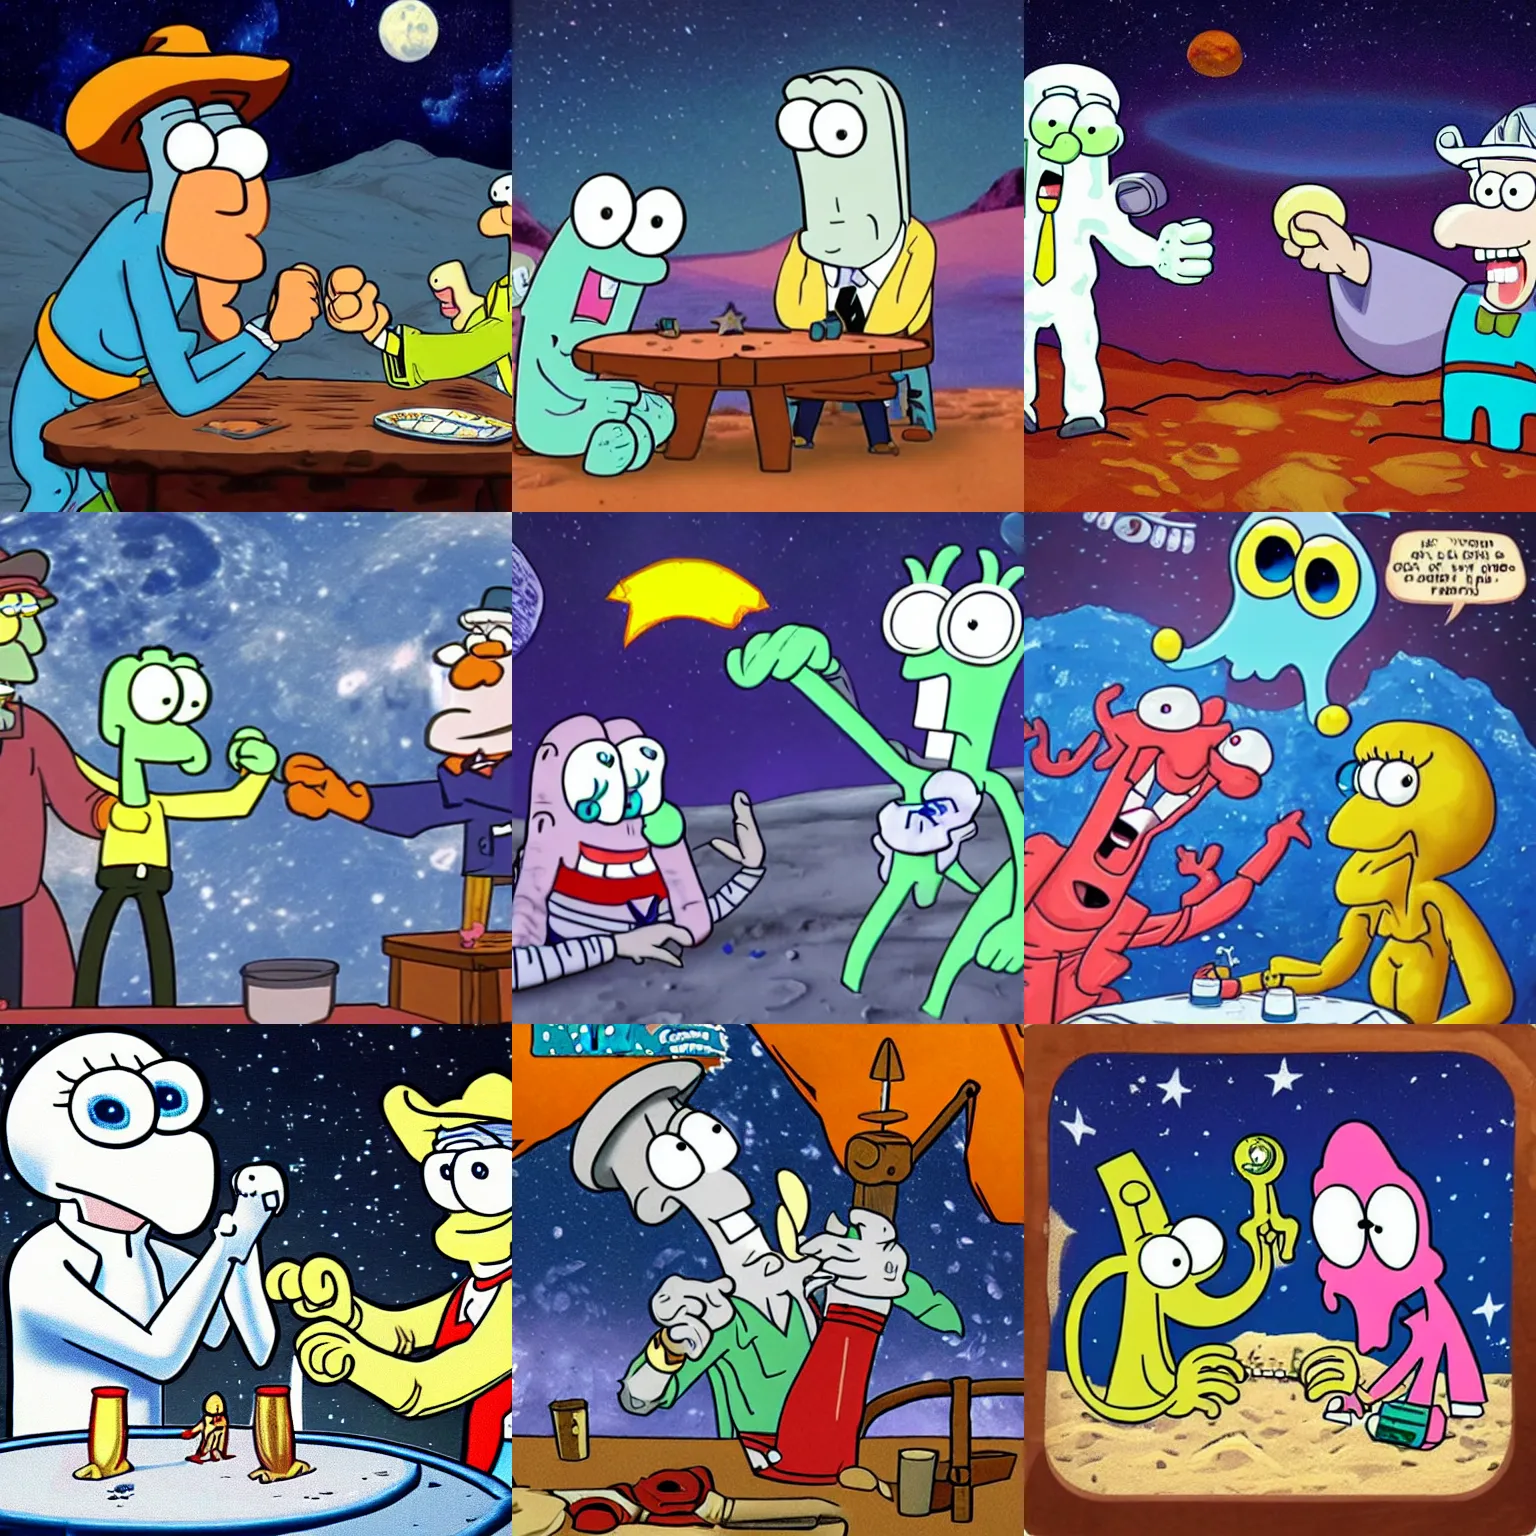 Prompt: Squidward from Spongebob Squarepants arm wrestling with cowboys on the moon